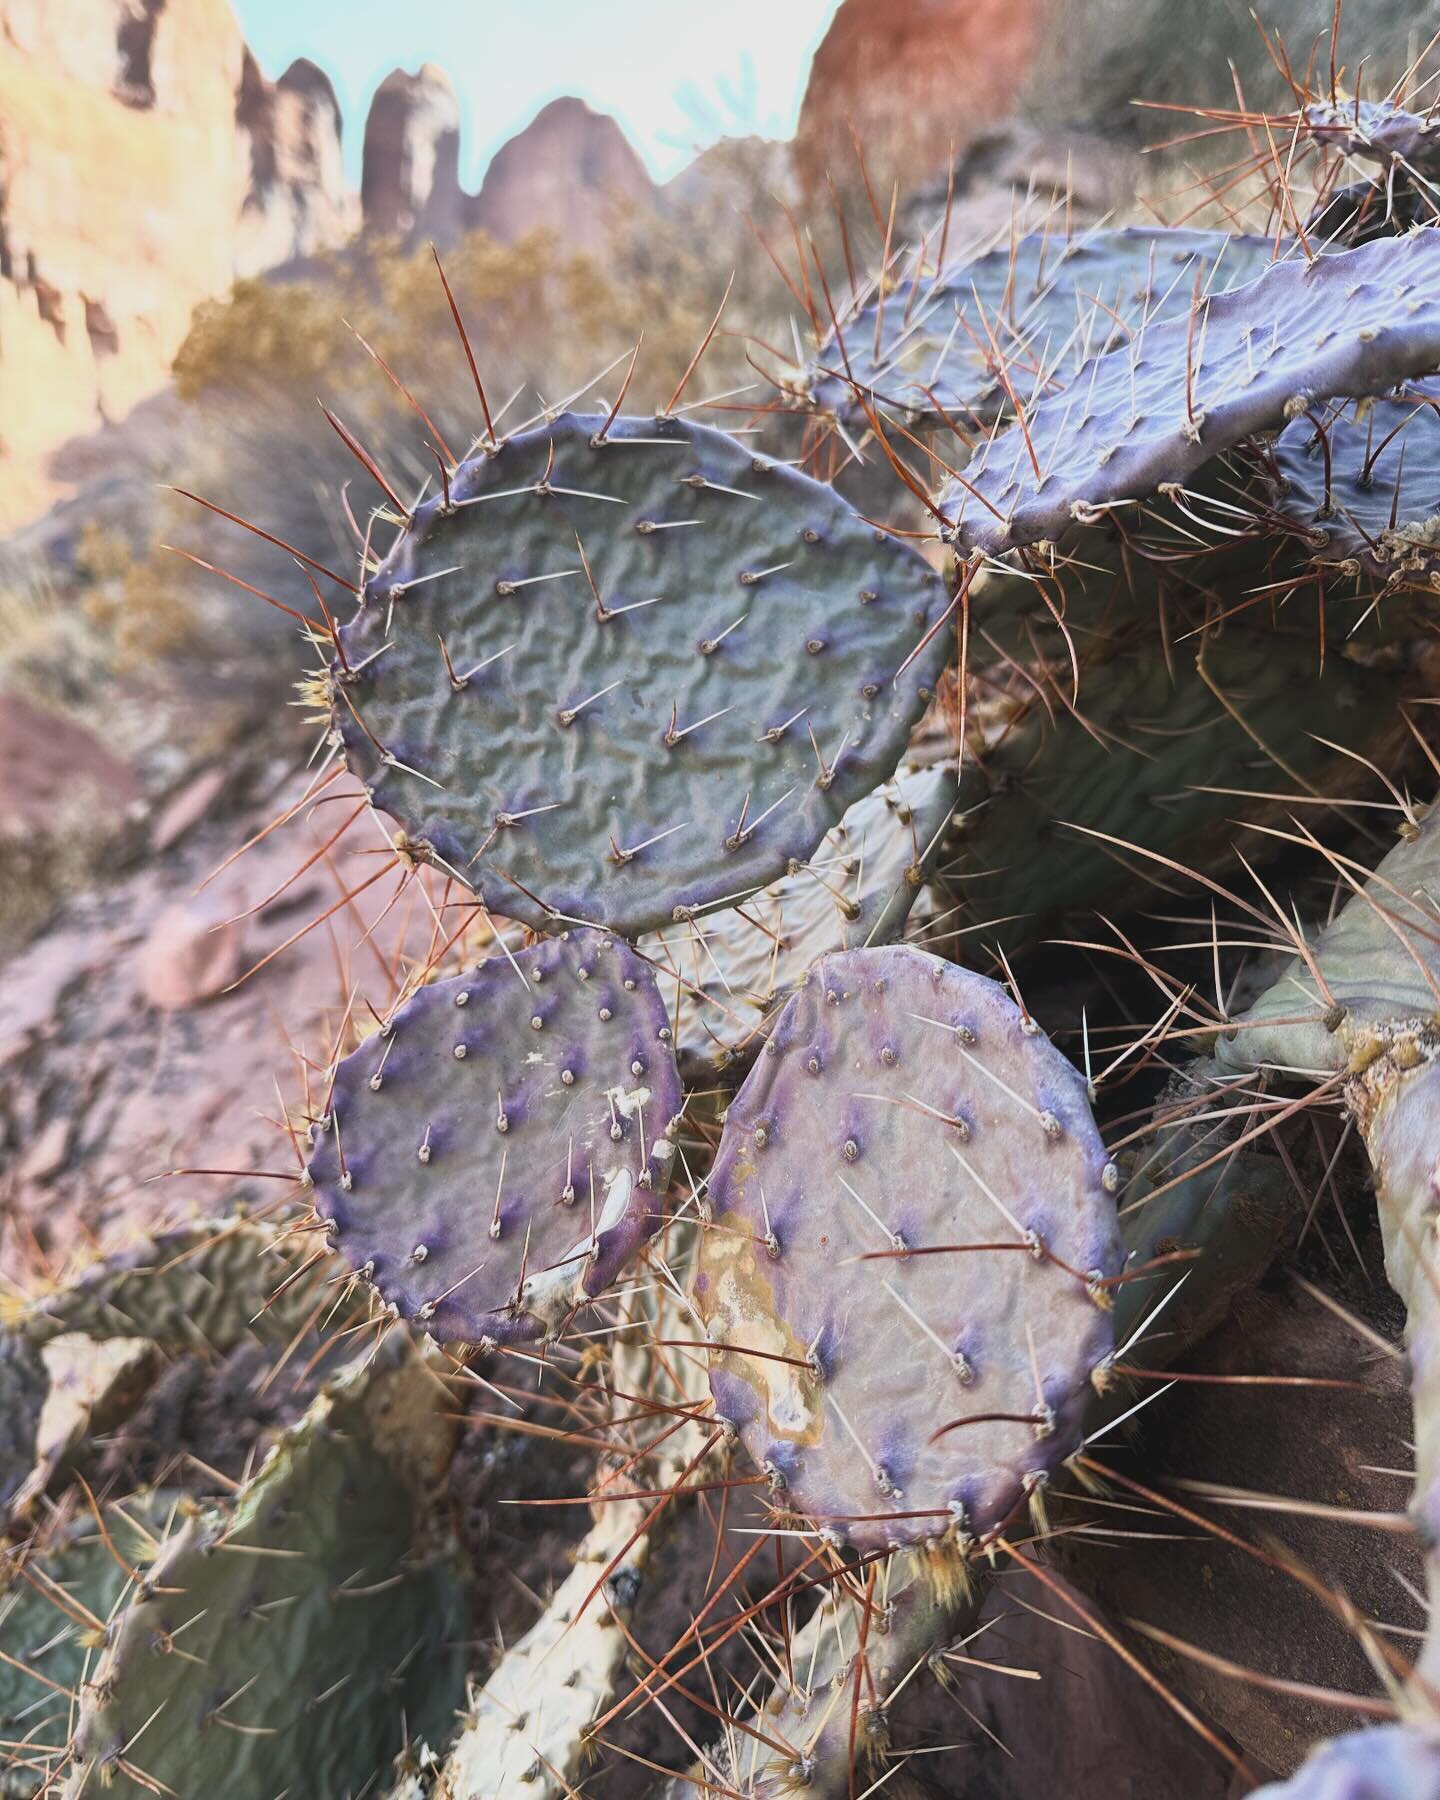 Providence is gifting us with the most atrocious winter weather&mdash;rainsleet, gray, a sort of icy snot on every surface&mdash;so I&rsquo;m going to think about cacti and other desert growing things we saw last week.

#utah #desert #hiking #cactus